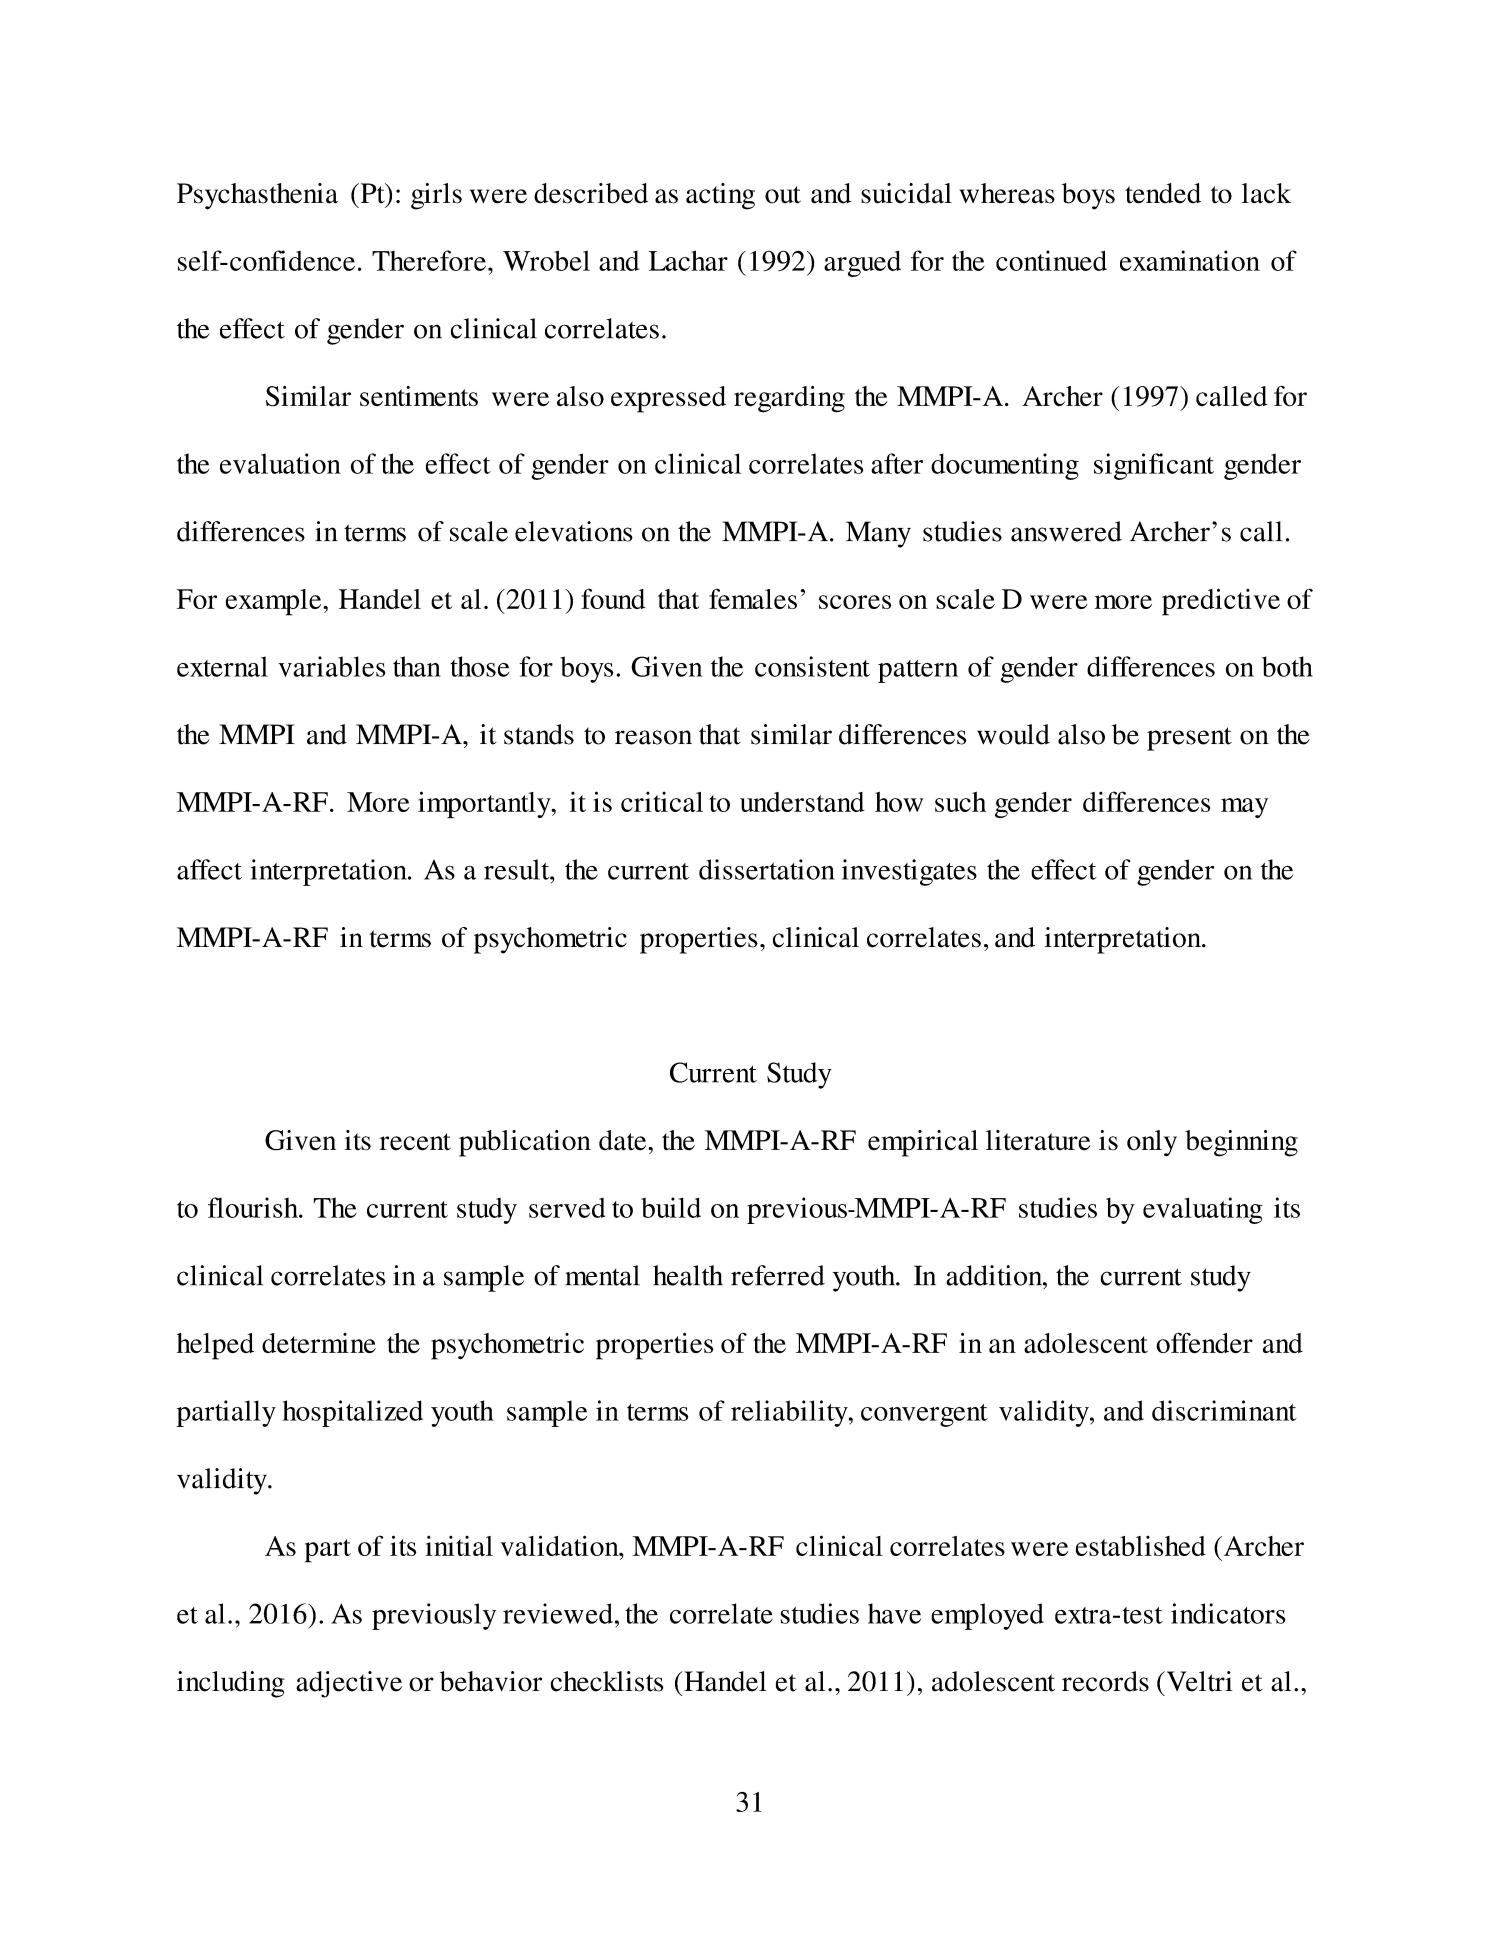 External Validation of the MMPI-A-RF with Youth with Mental Health Needs: A Systematic Examination of Symptom-Based Correlates and Interpretive Statements
                                                
                                                    31
                                                